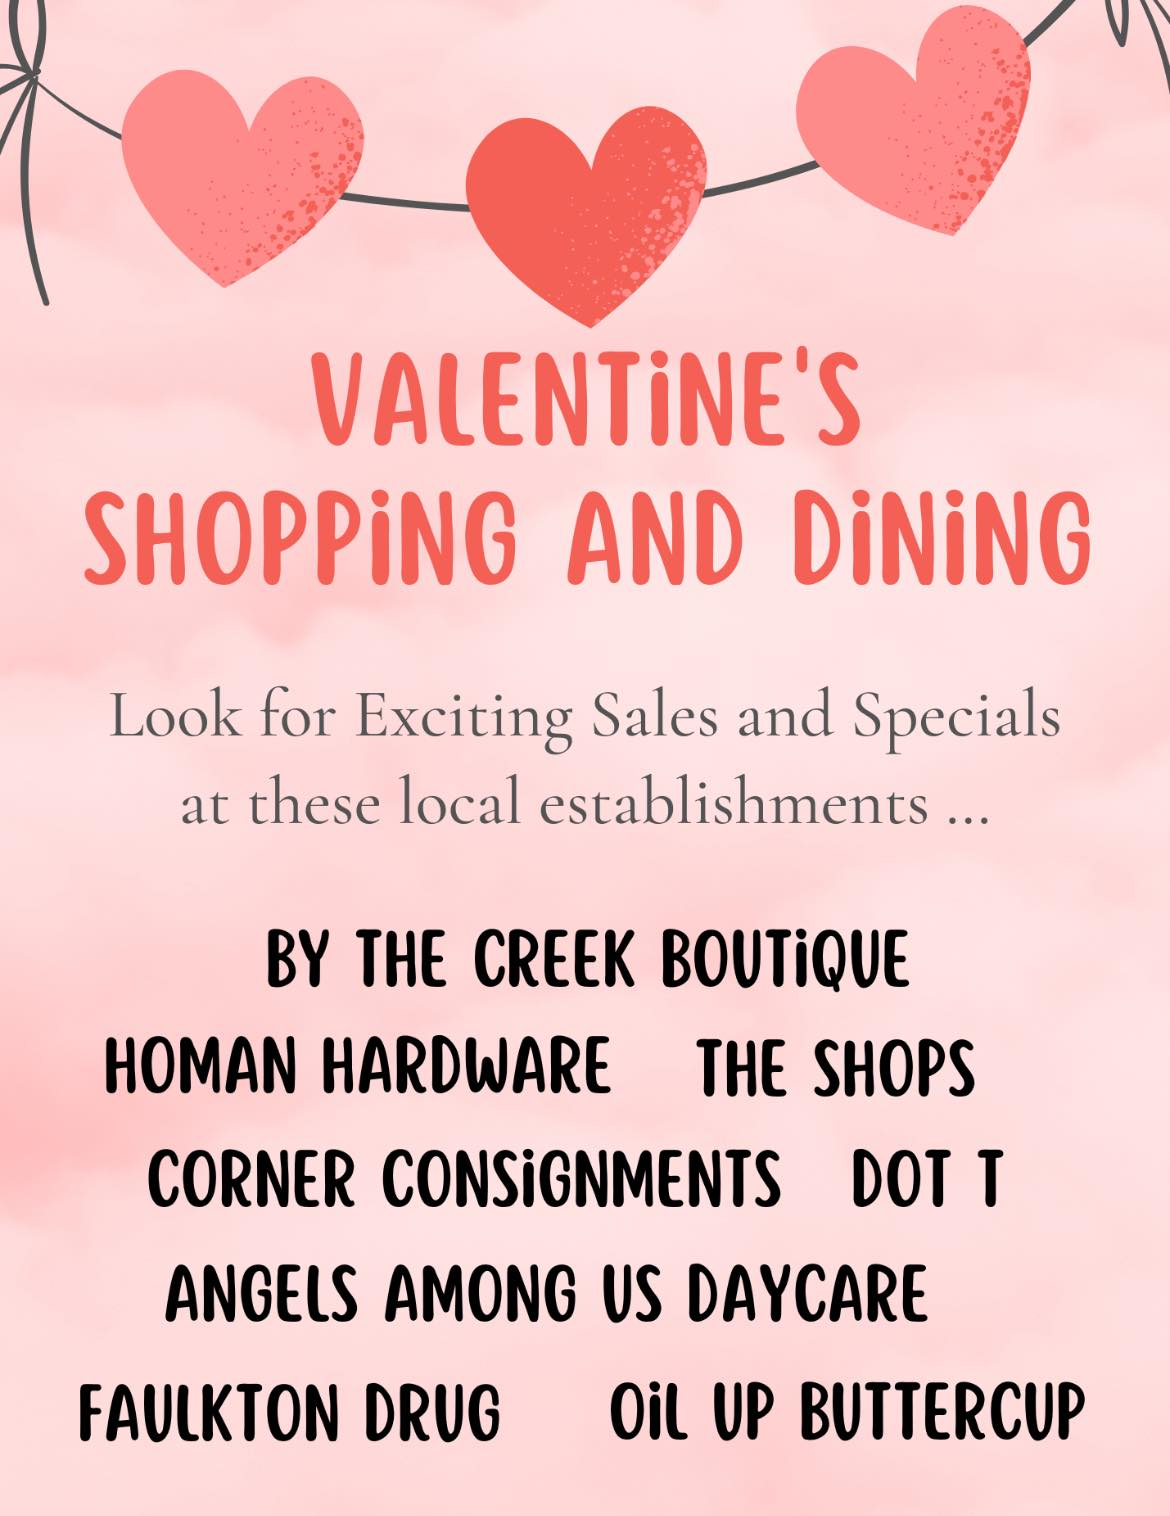 Click the Shop Local for Valentine’s Day slide photo to open